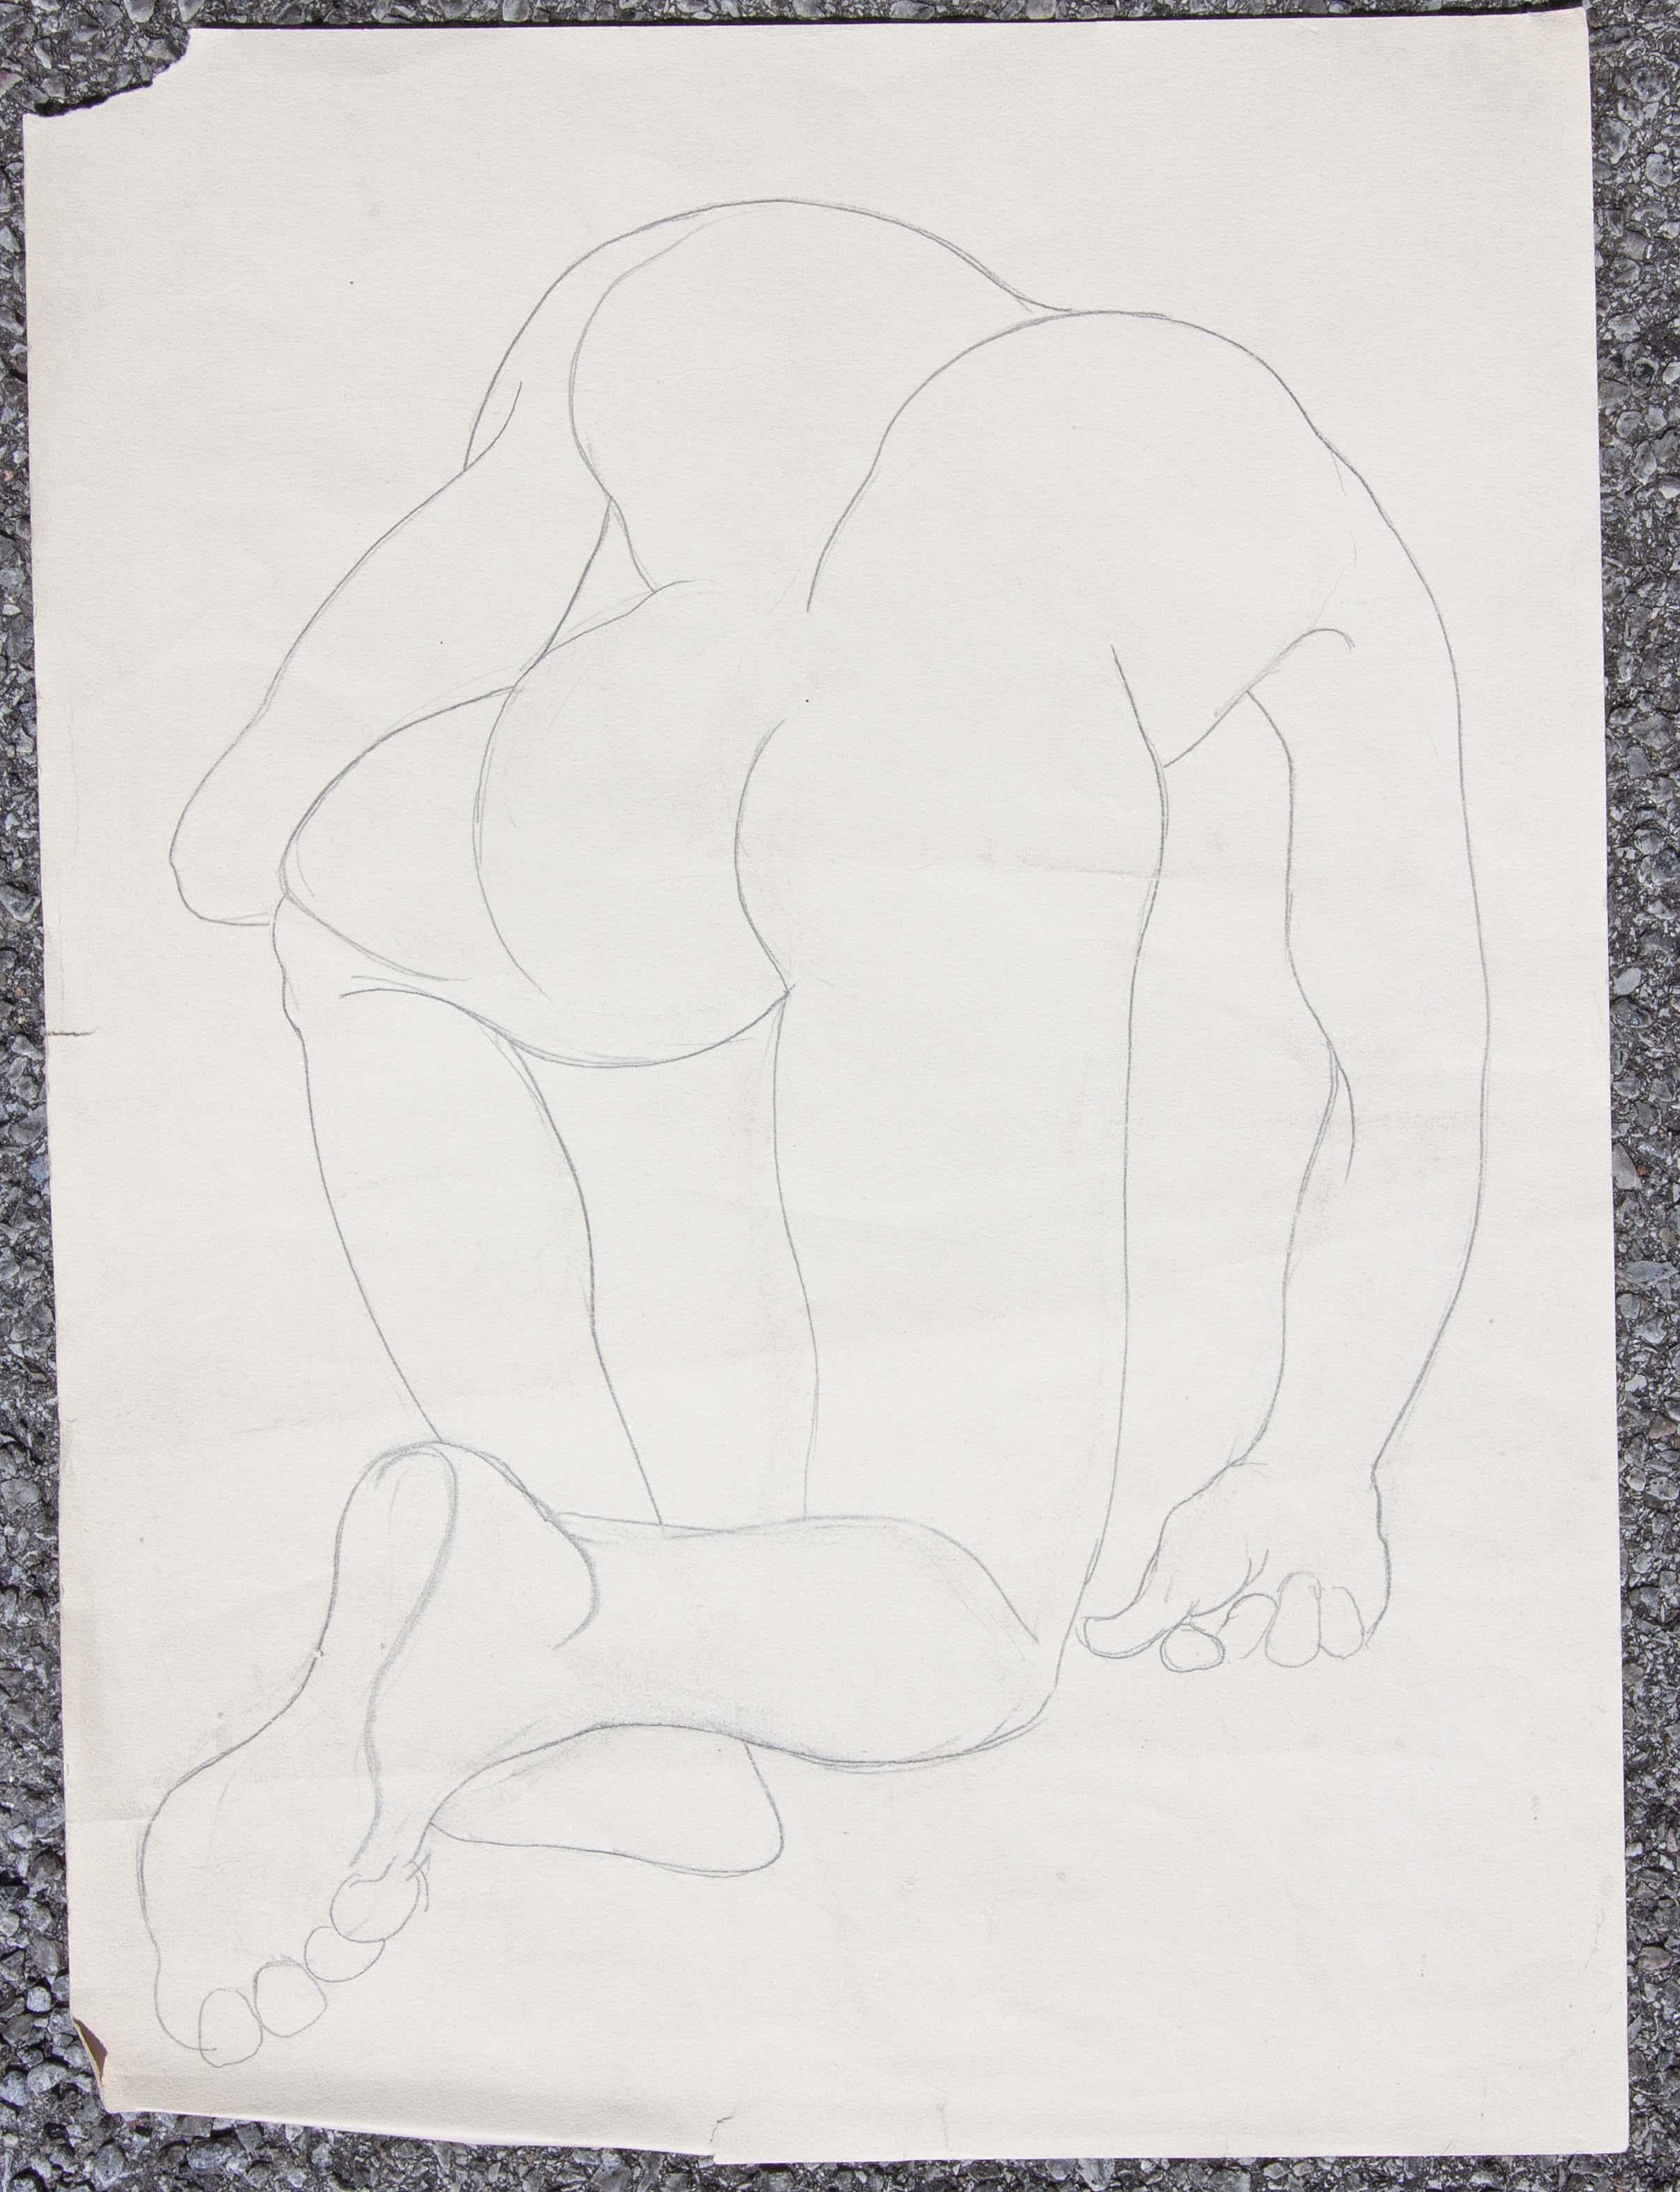 Two male  nude studies by Tony Sisti. Sisti was a master draftsman. With just a few lines he captures the moment. Sisti was a professional boxer and an accomplished artist. 

A long-time painter and teacher in Buffalo, New York, Anthony 